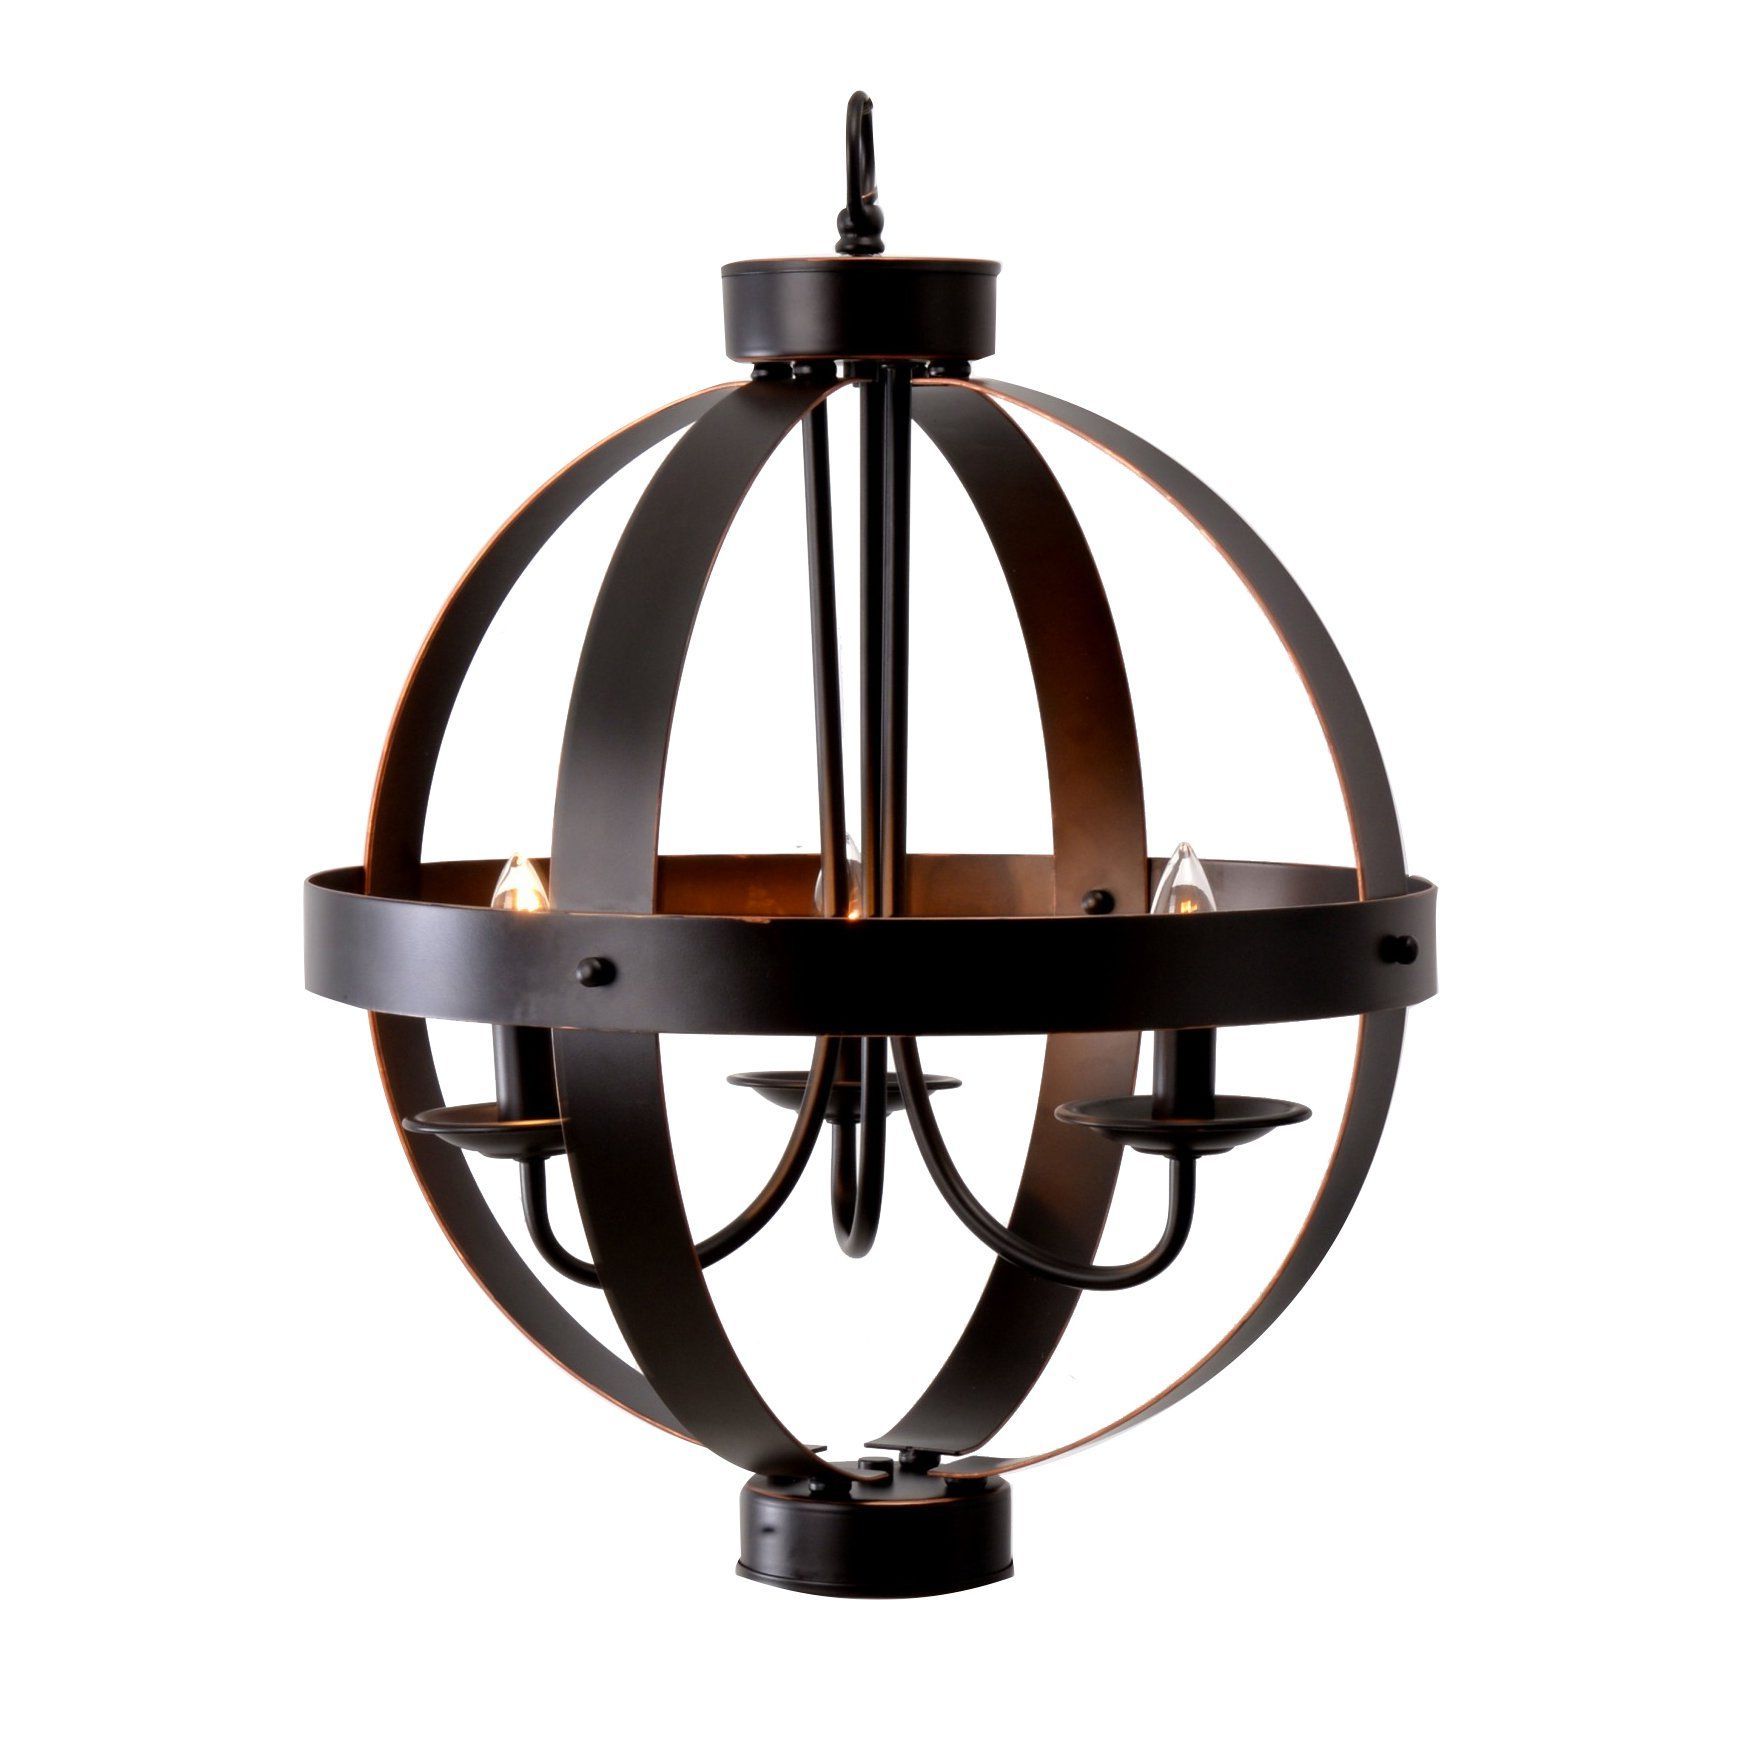 La Sarre 3 Light Globe Chandelier Pertaining To Most Recently Released La Sarre 3 Light Globe Chandeliers (View 24 of 25)